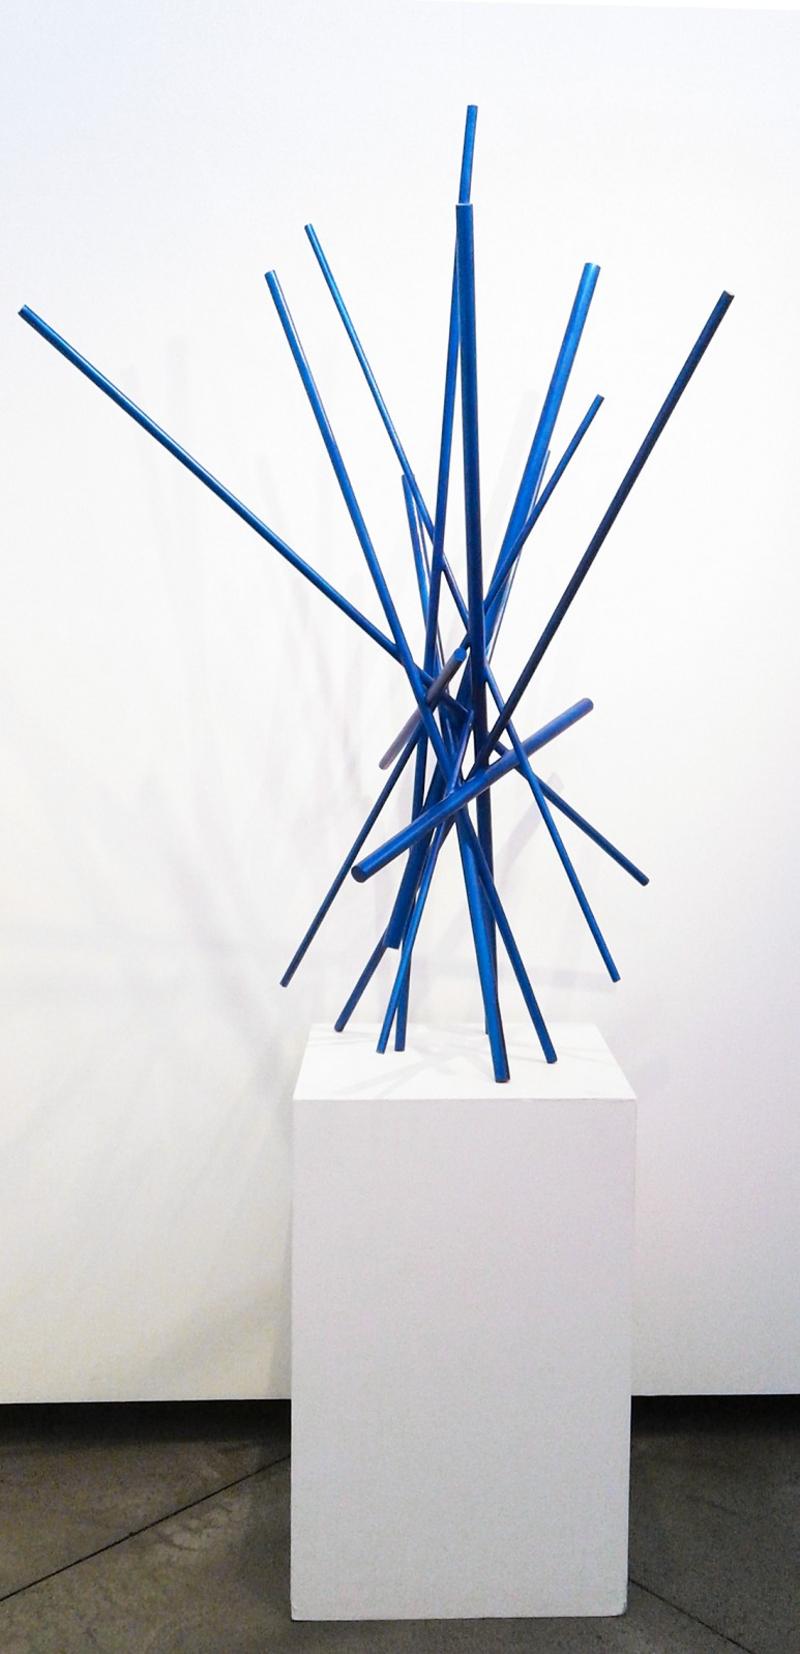 Saturated in cerulean—like the colour of a deep blue sky, intersecting lengths of wood form a dramatic sculpture in this abstract piece by Canadian artist, Shayne Dark. From his studio in the countryside, Dark is constantly inspired by his natural